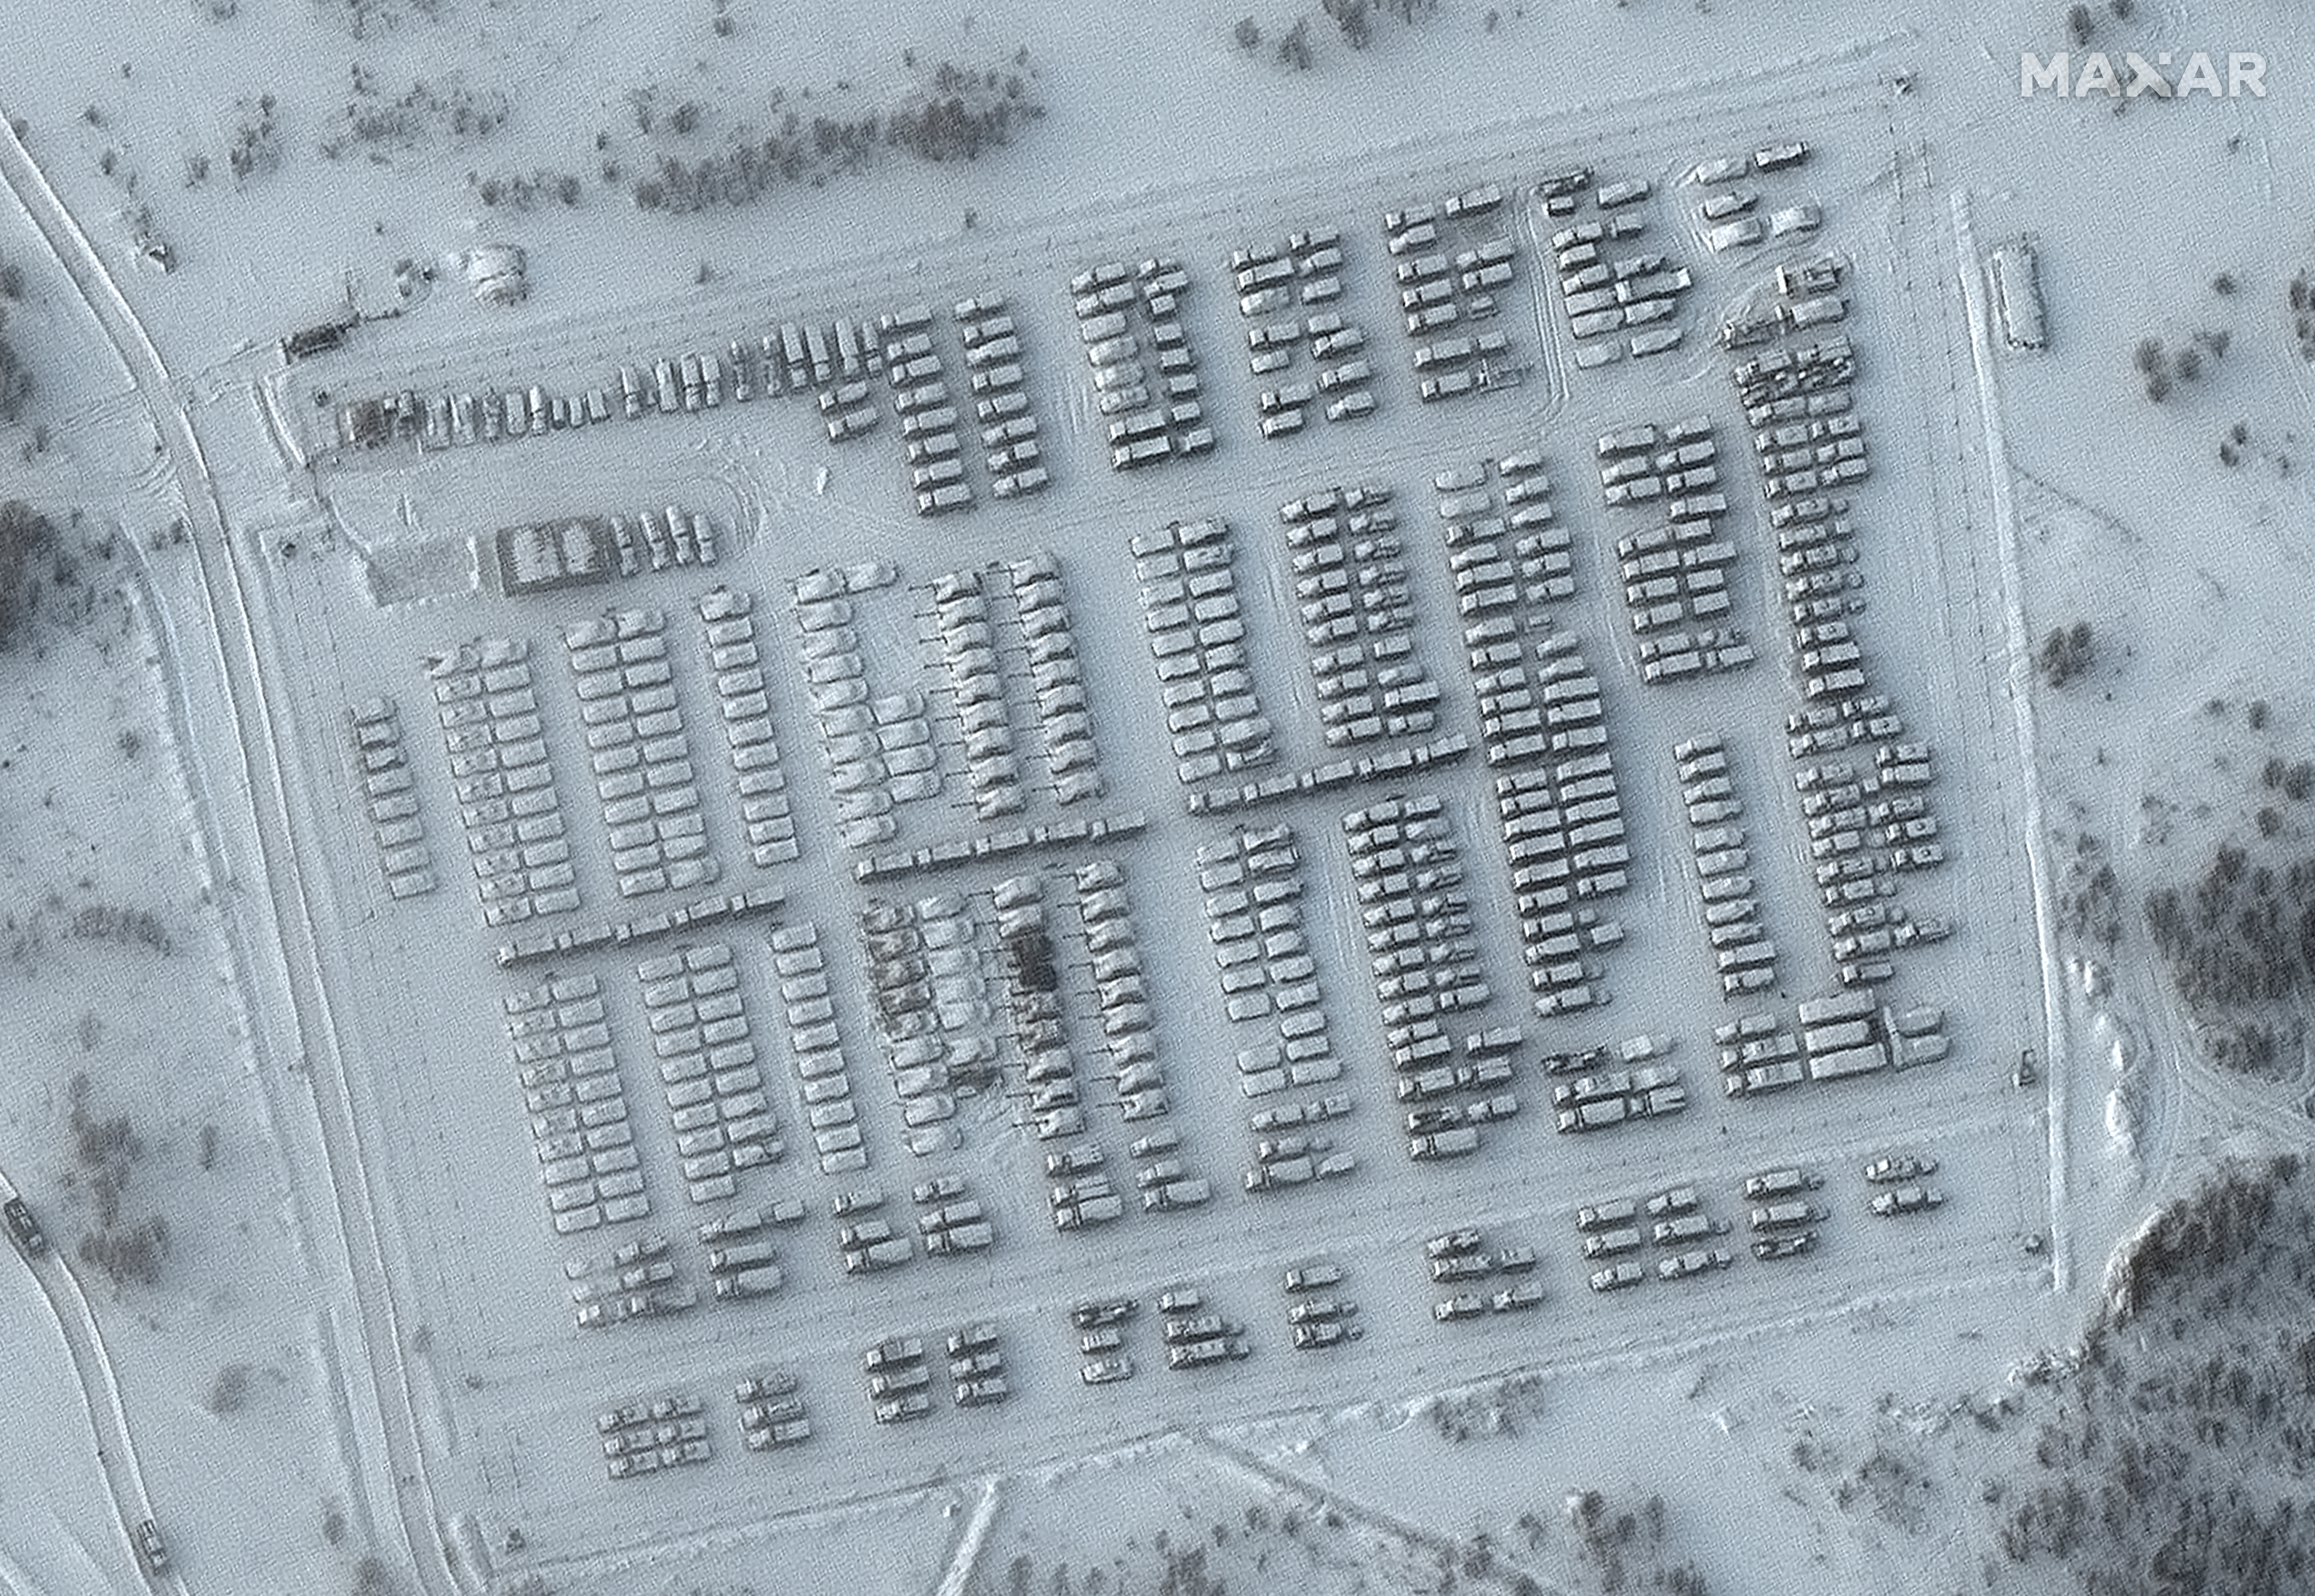 A satellite image shows Russian battle groups and vehicles parked in Yelnya, Russia on January 19.